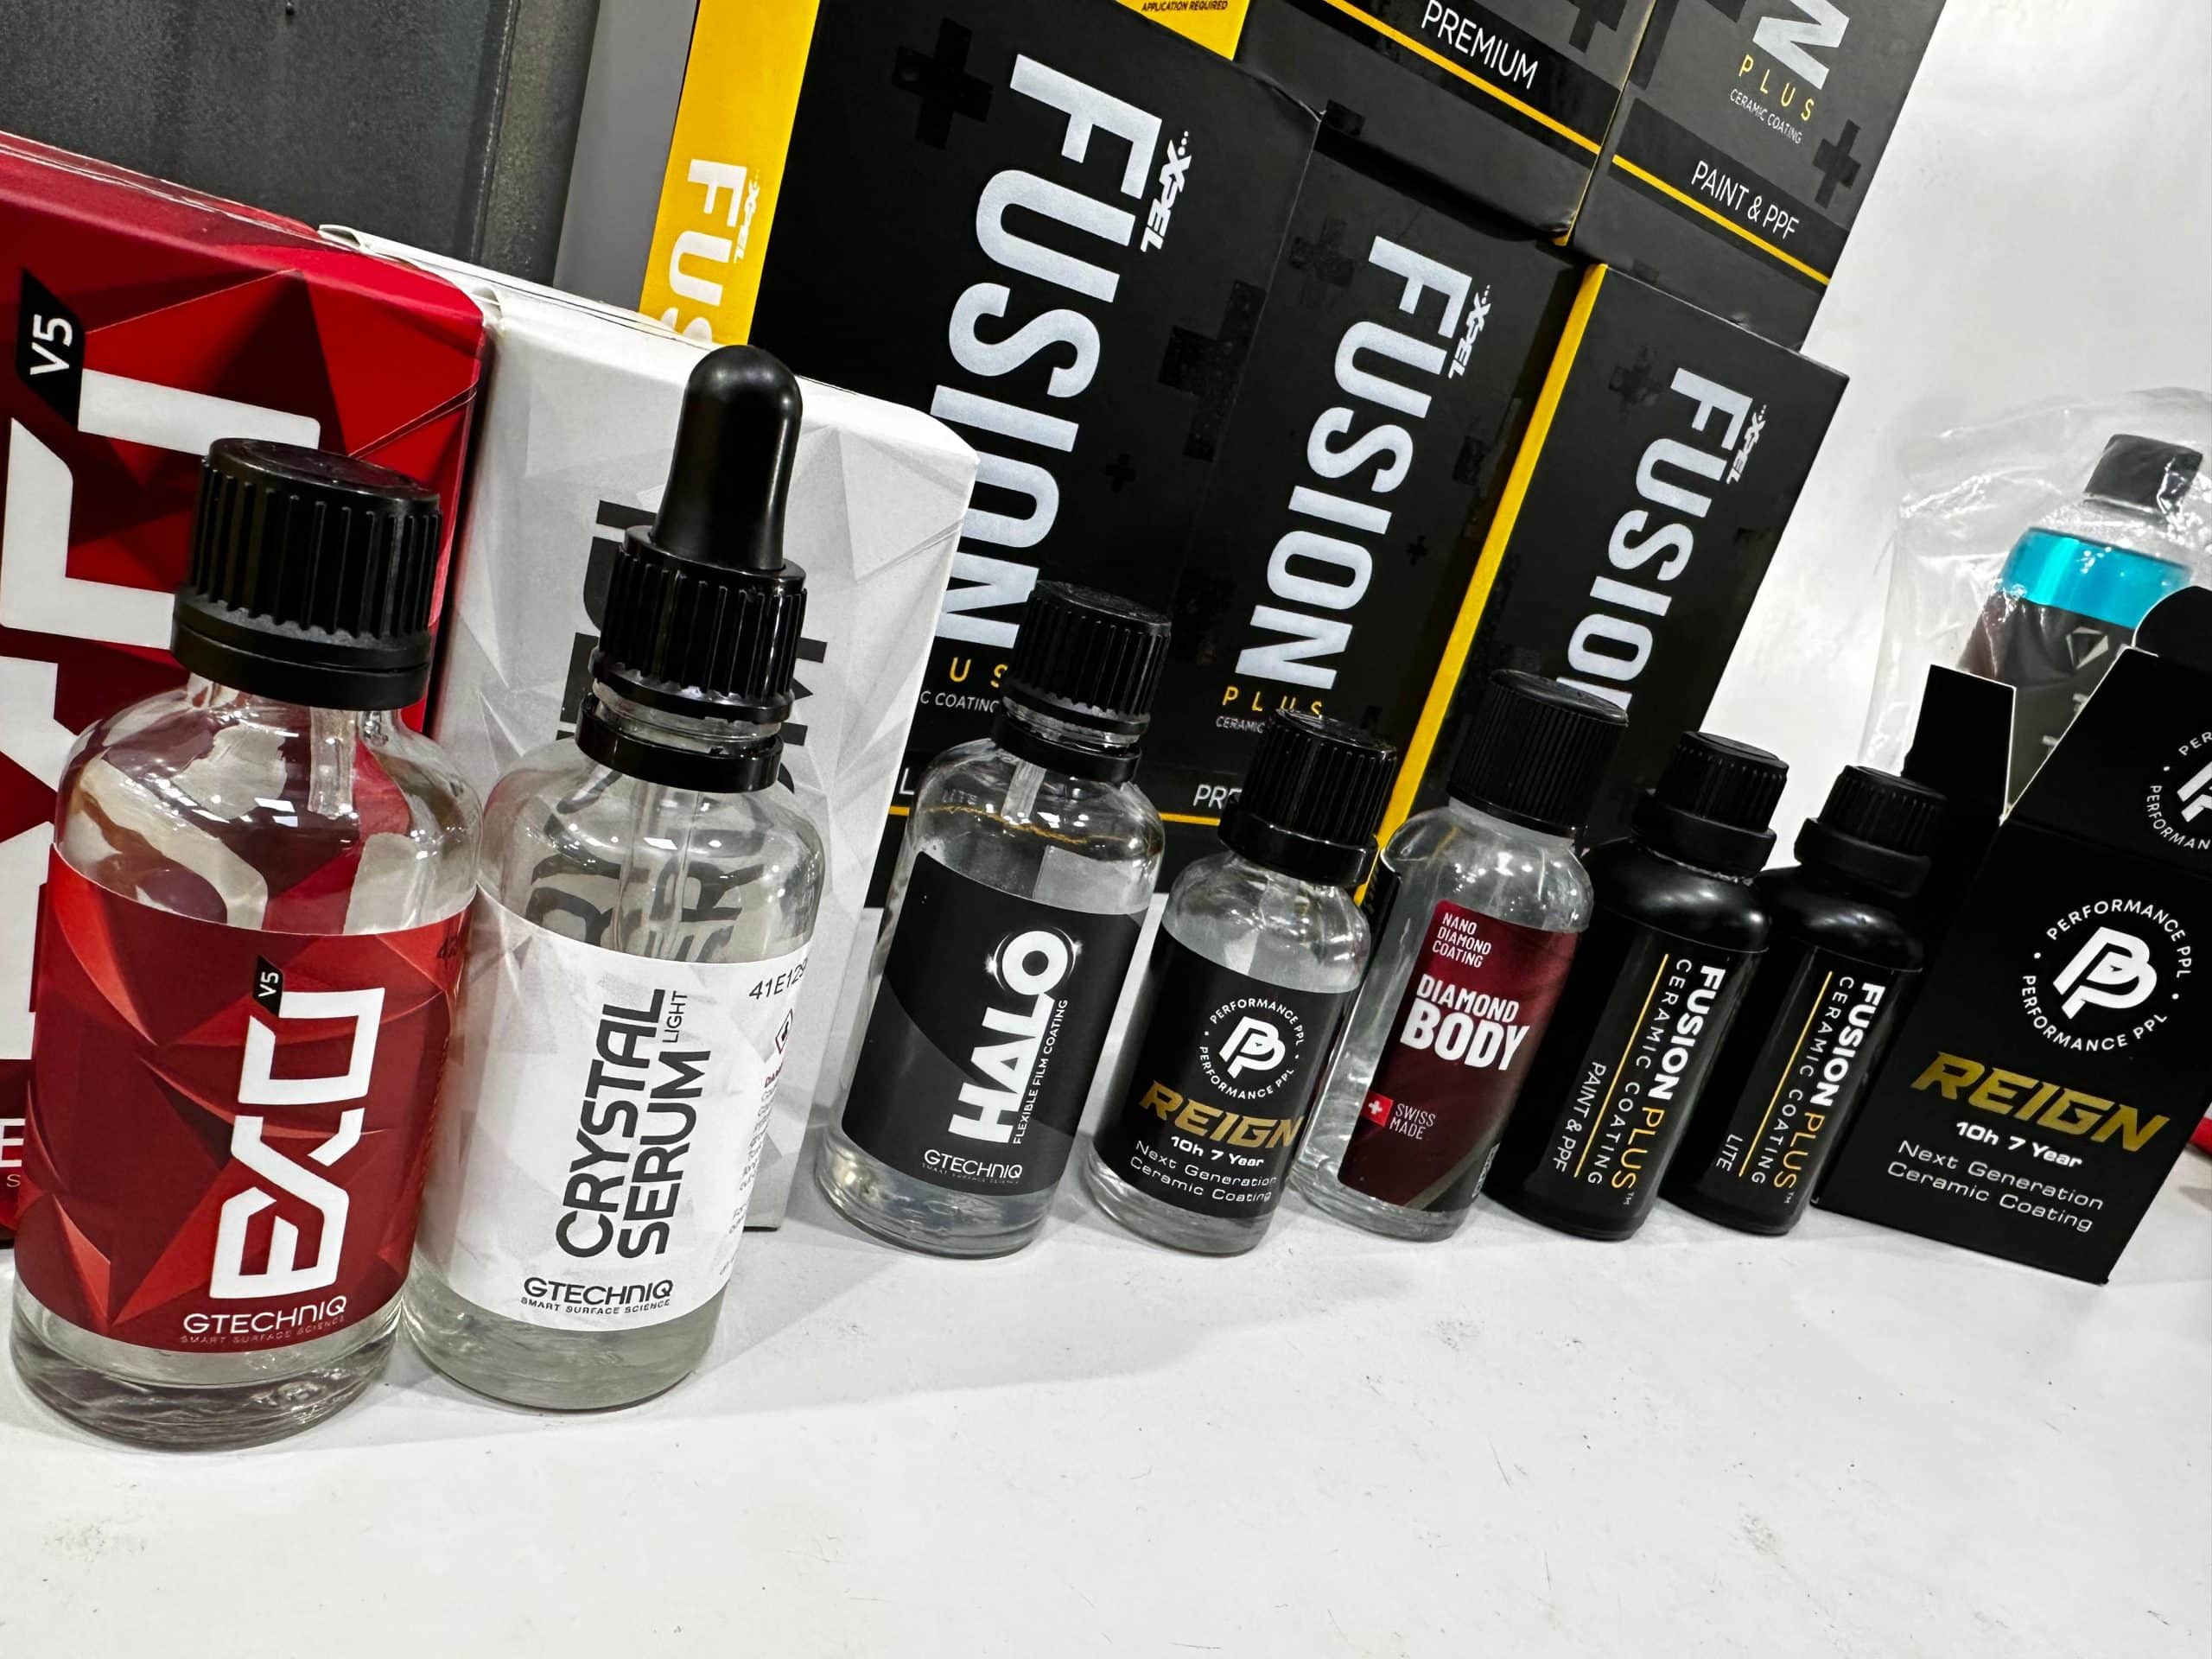 A line-up of various car care products including bottles of ceramic coatings, sealants, and cleaning agents on a white surface with branded packaging. The display offers essential items for car valeting enthusiasts seeking top-notch finish and protection.